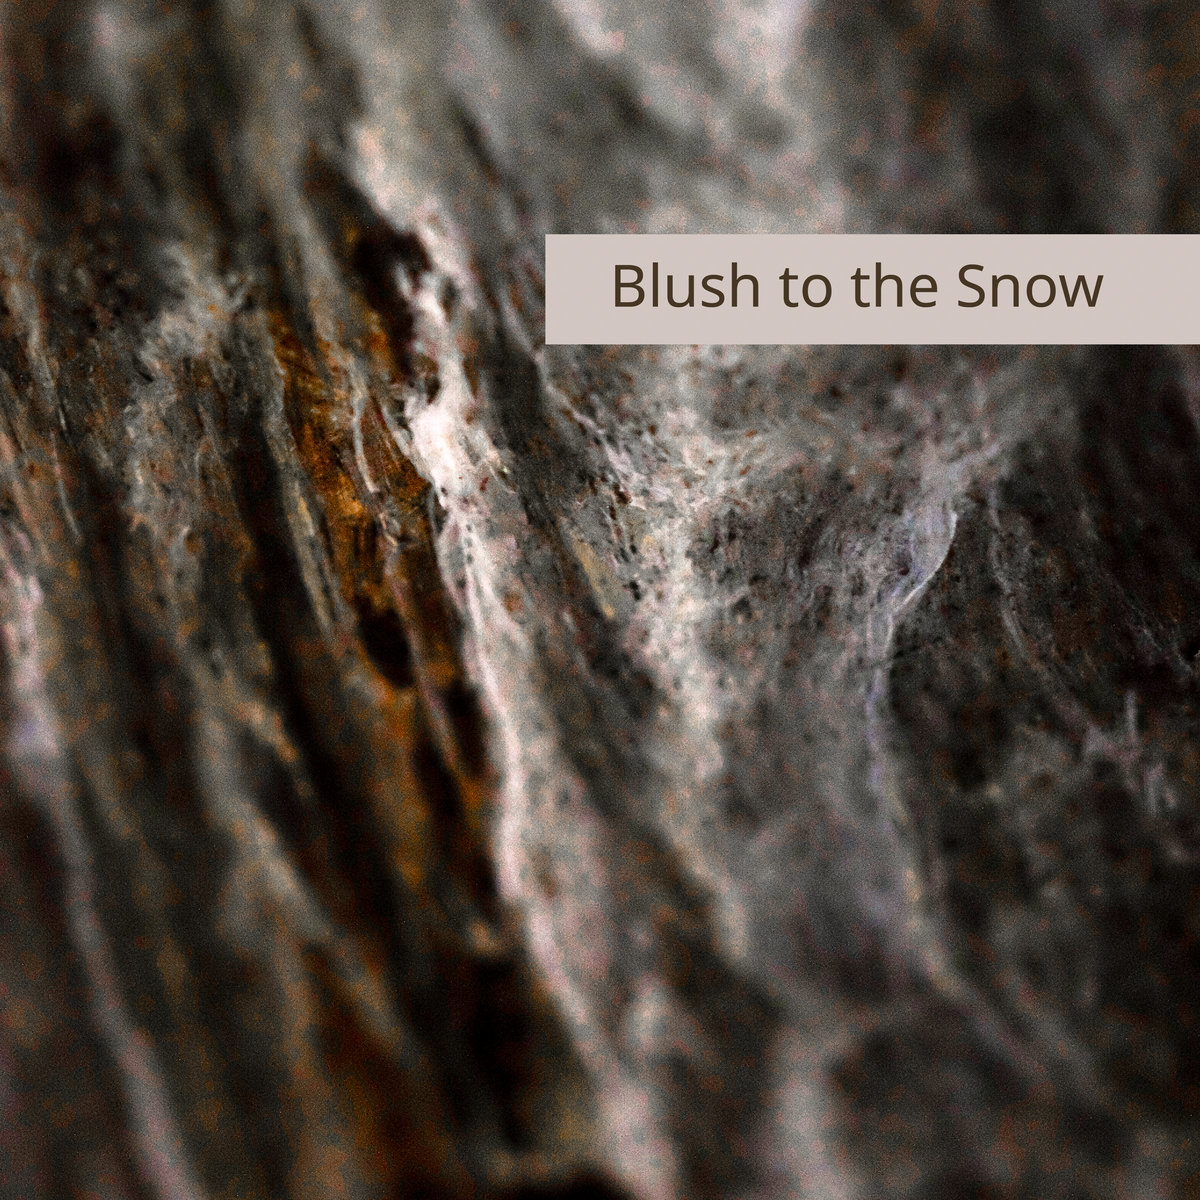 [album cover art] Blush to the Snow – Fading Flames